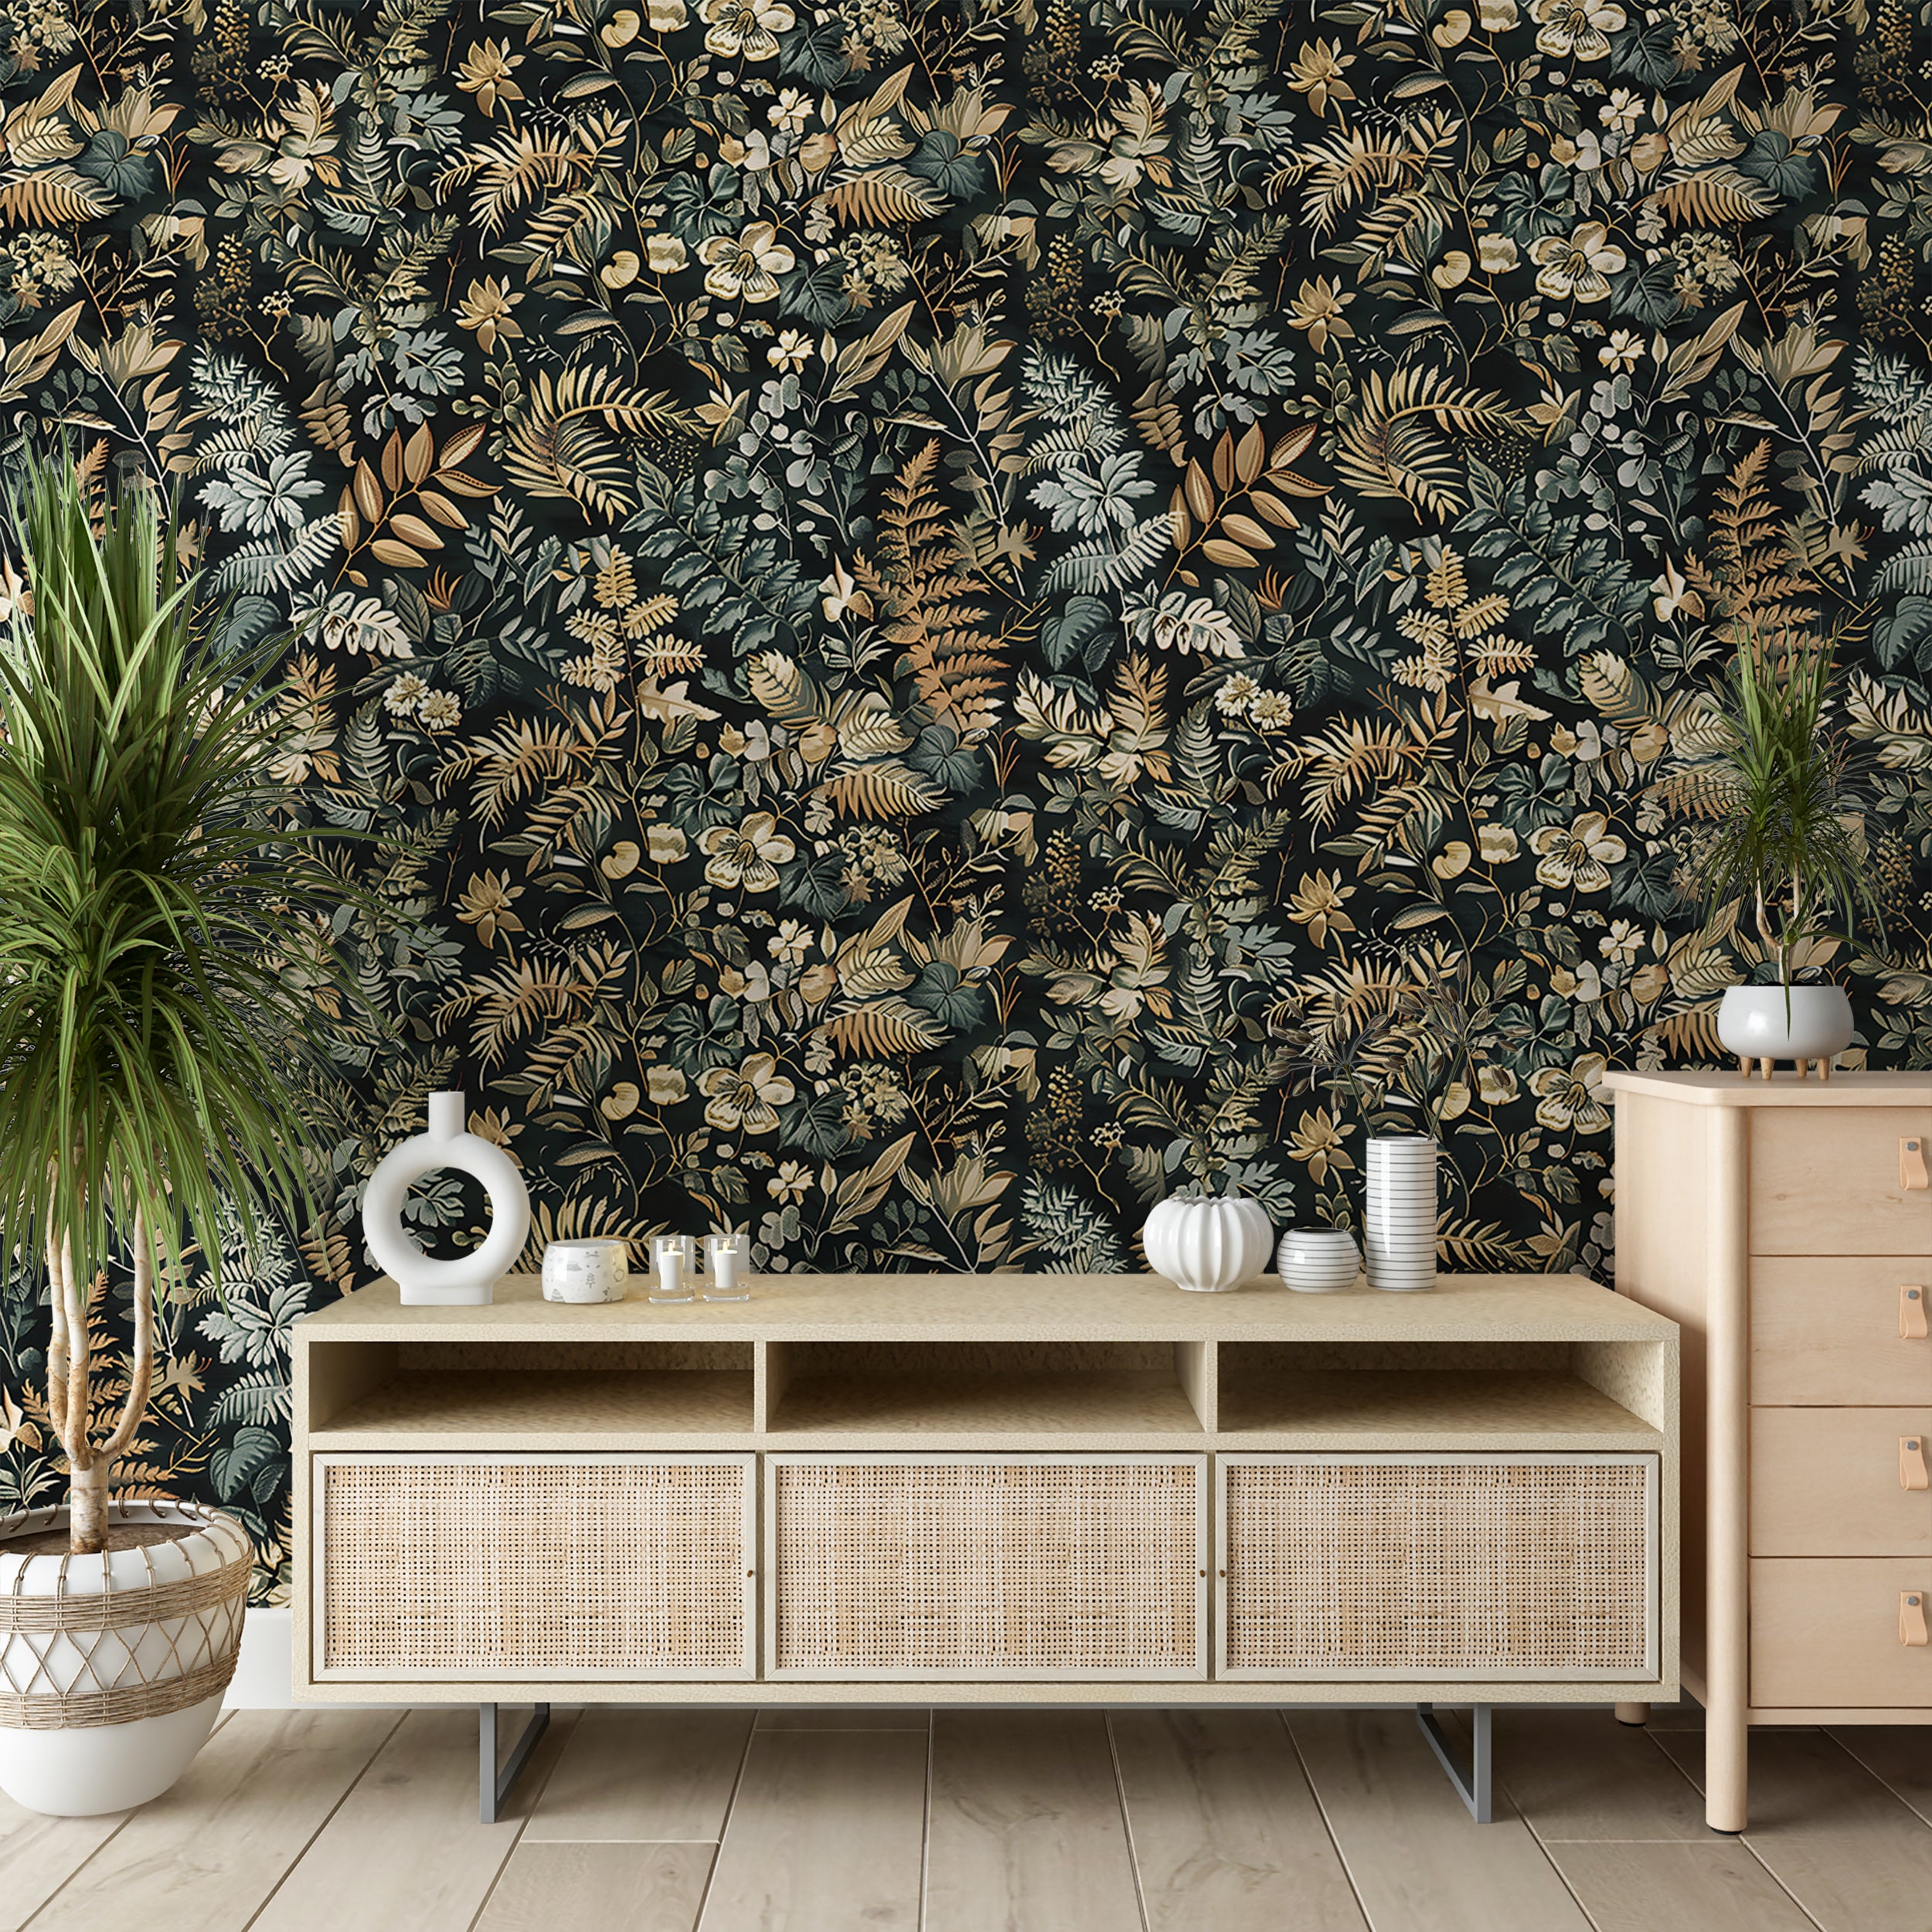 Dark Floral Wallpaper, Peel and Stick Fern Pattern Decal, Wild Flowers and Leaves Wall Decor, Removable Dark Botanical Forest Flower Wallpaper